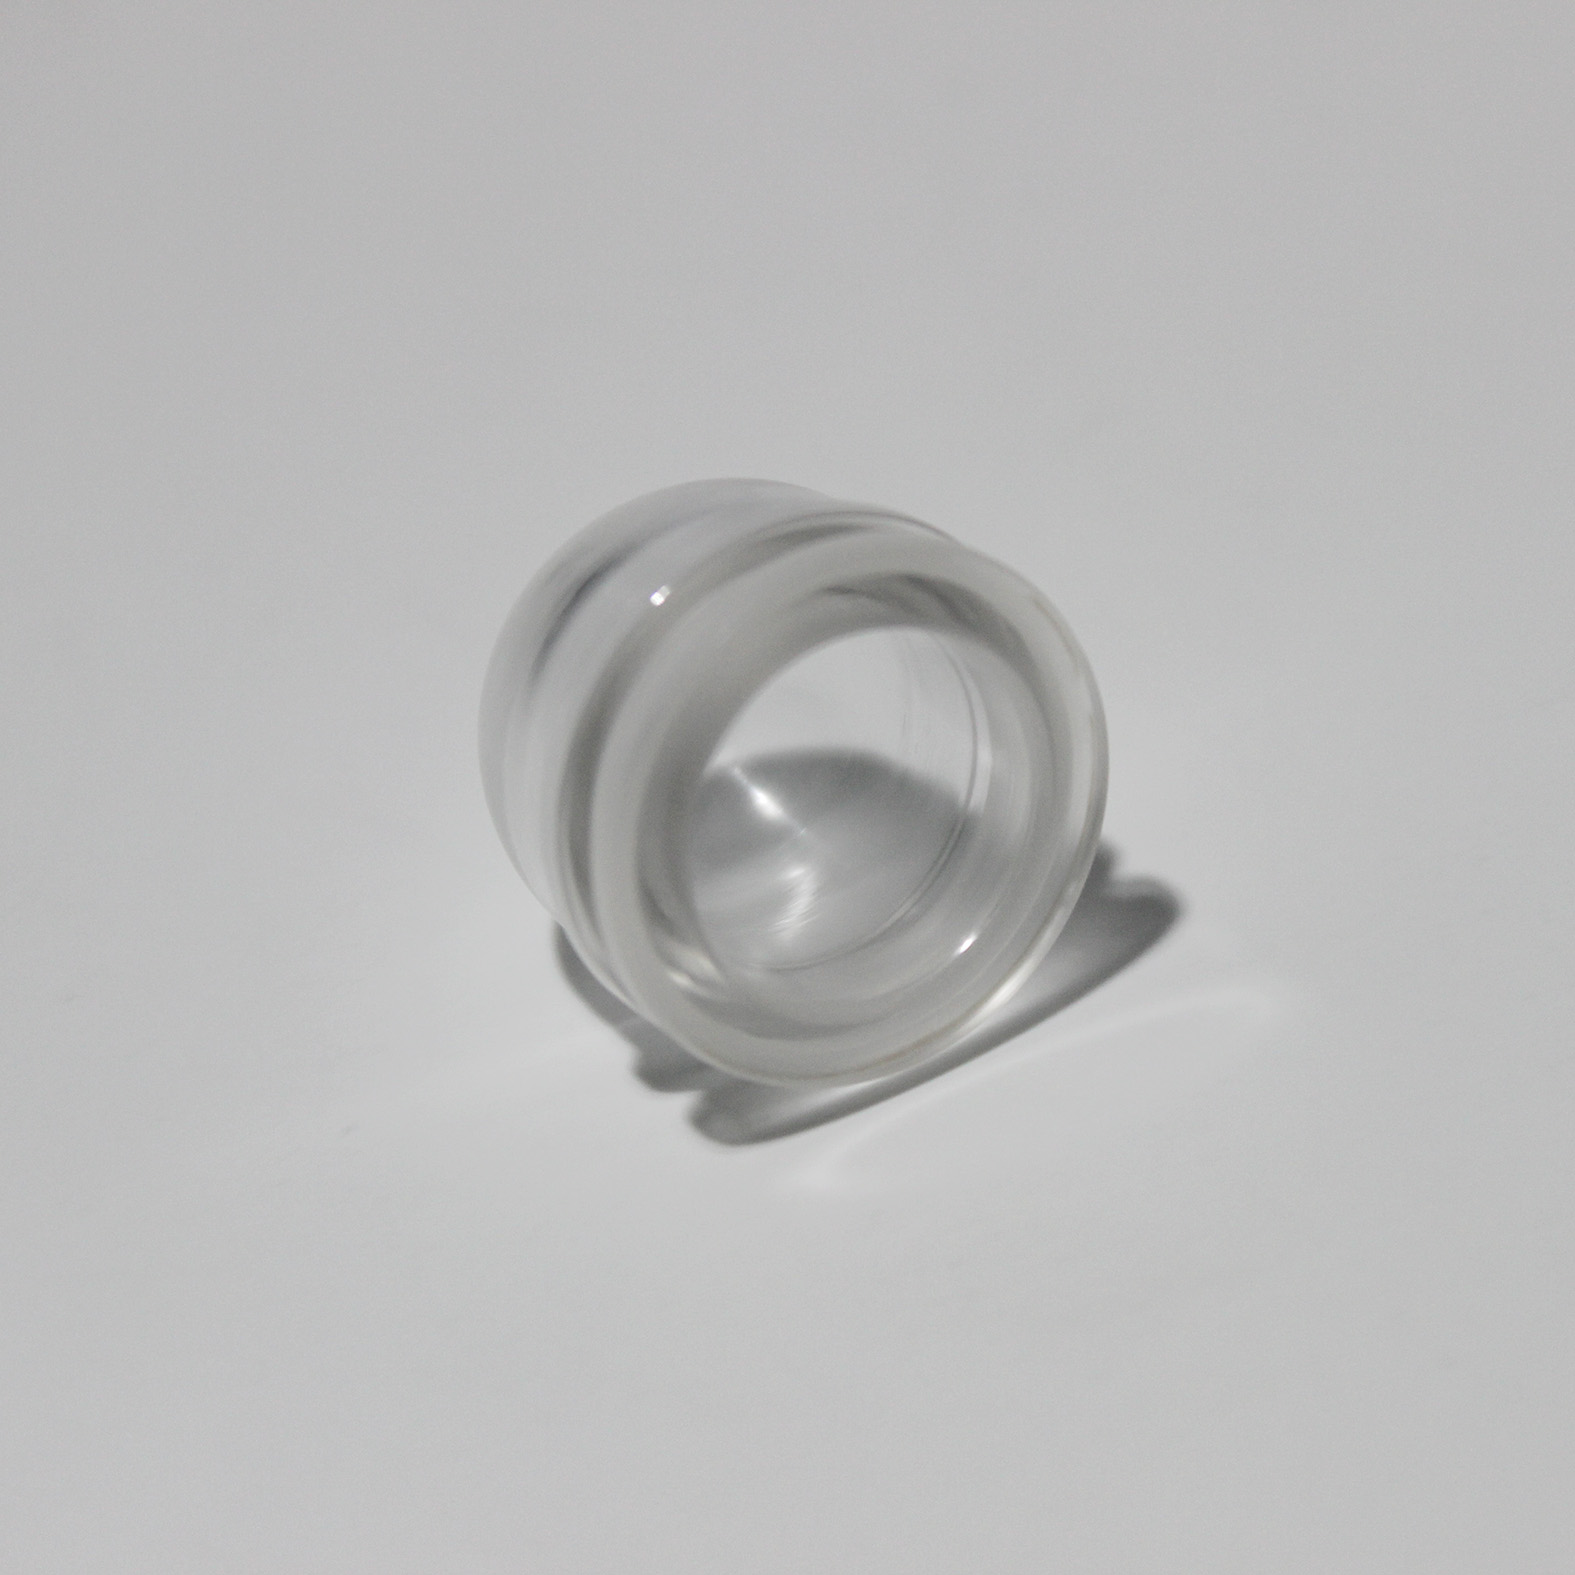 China Factory Customized Optical Glass Lens Spherical Dome Port